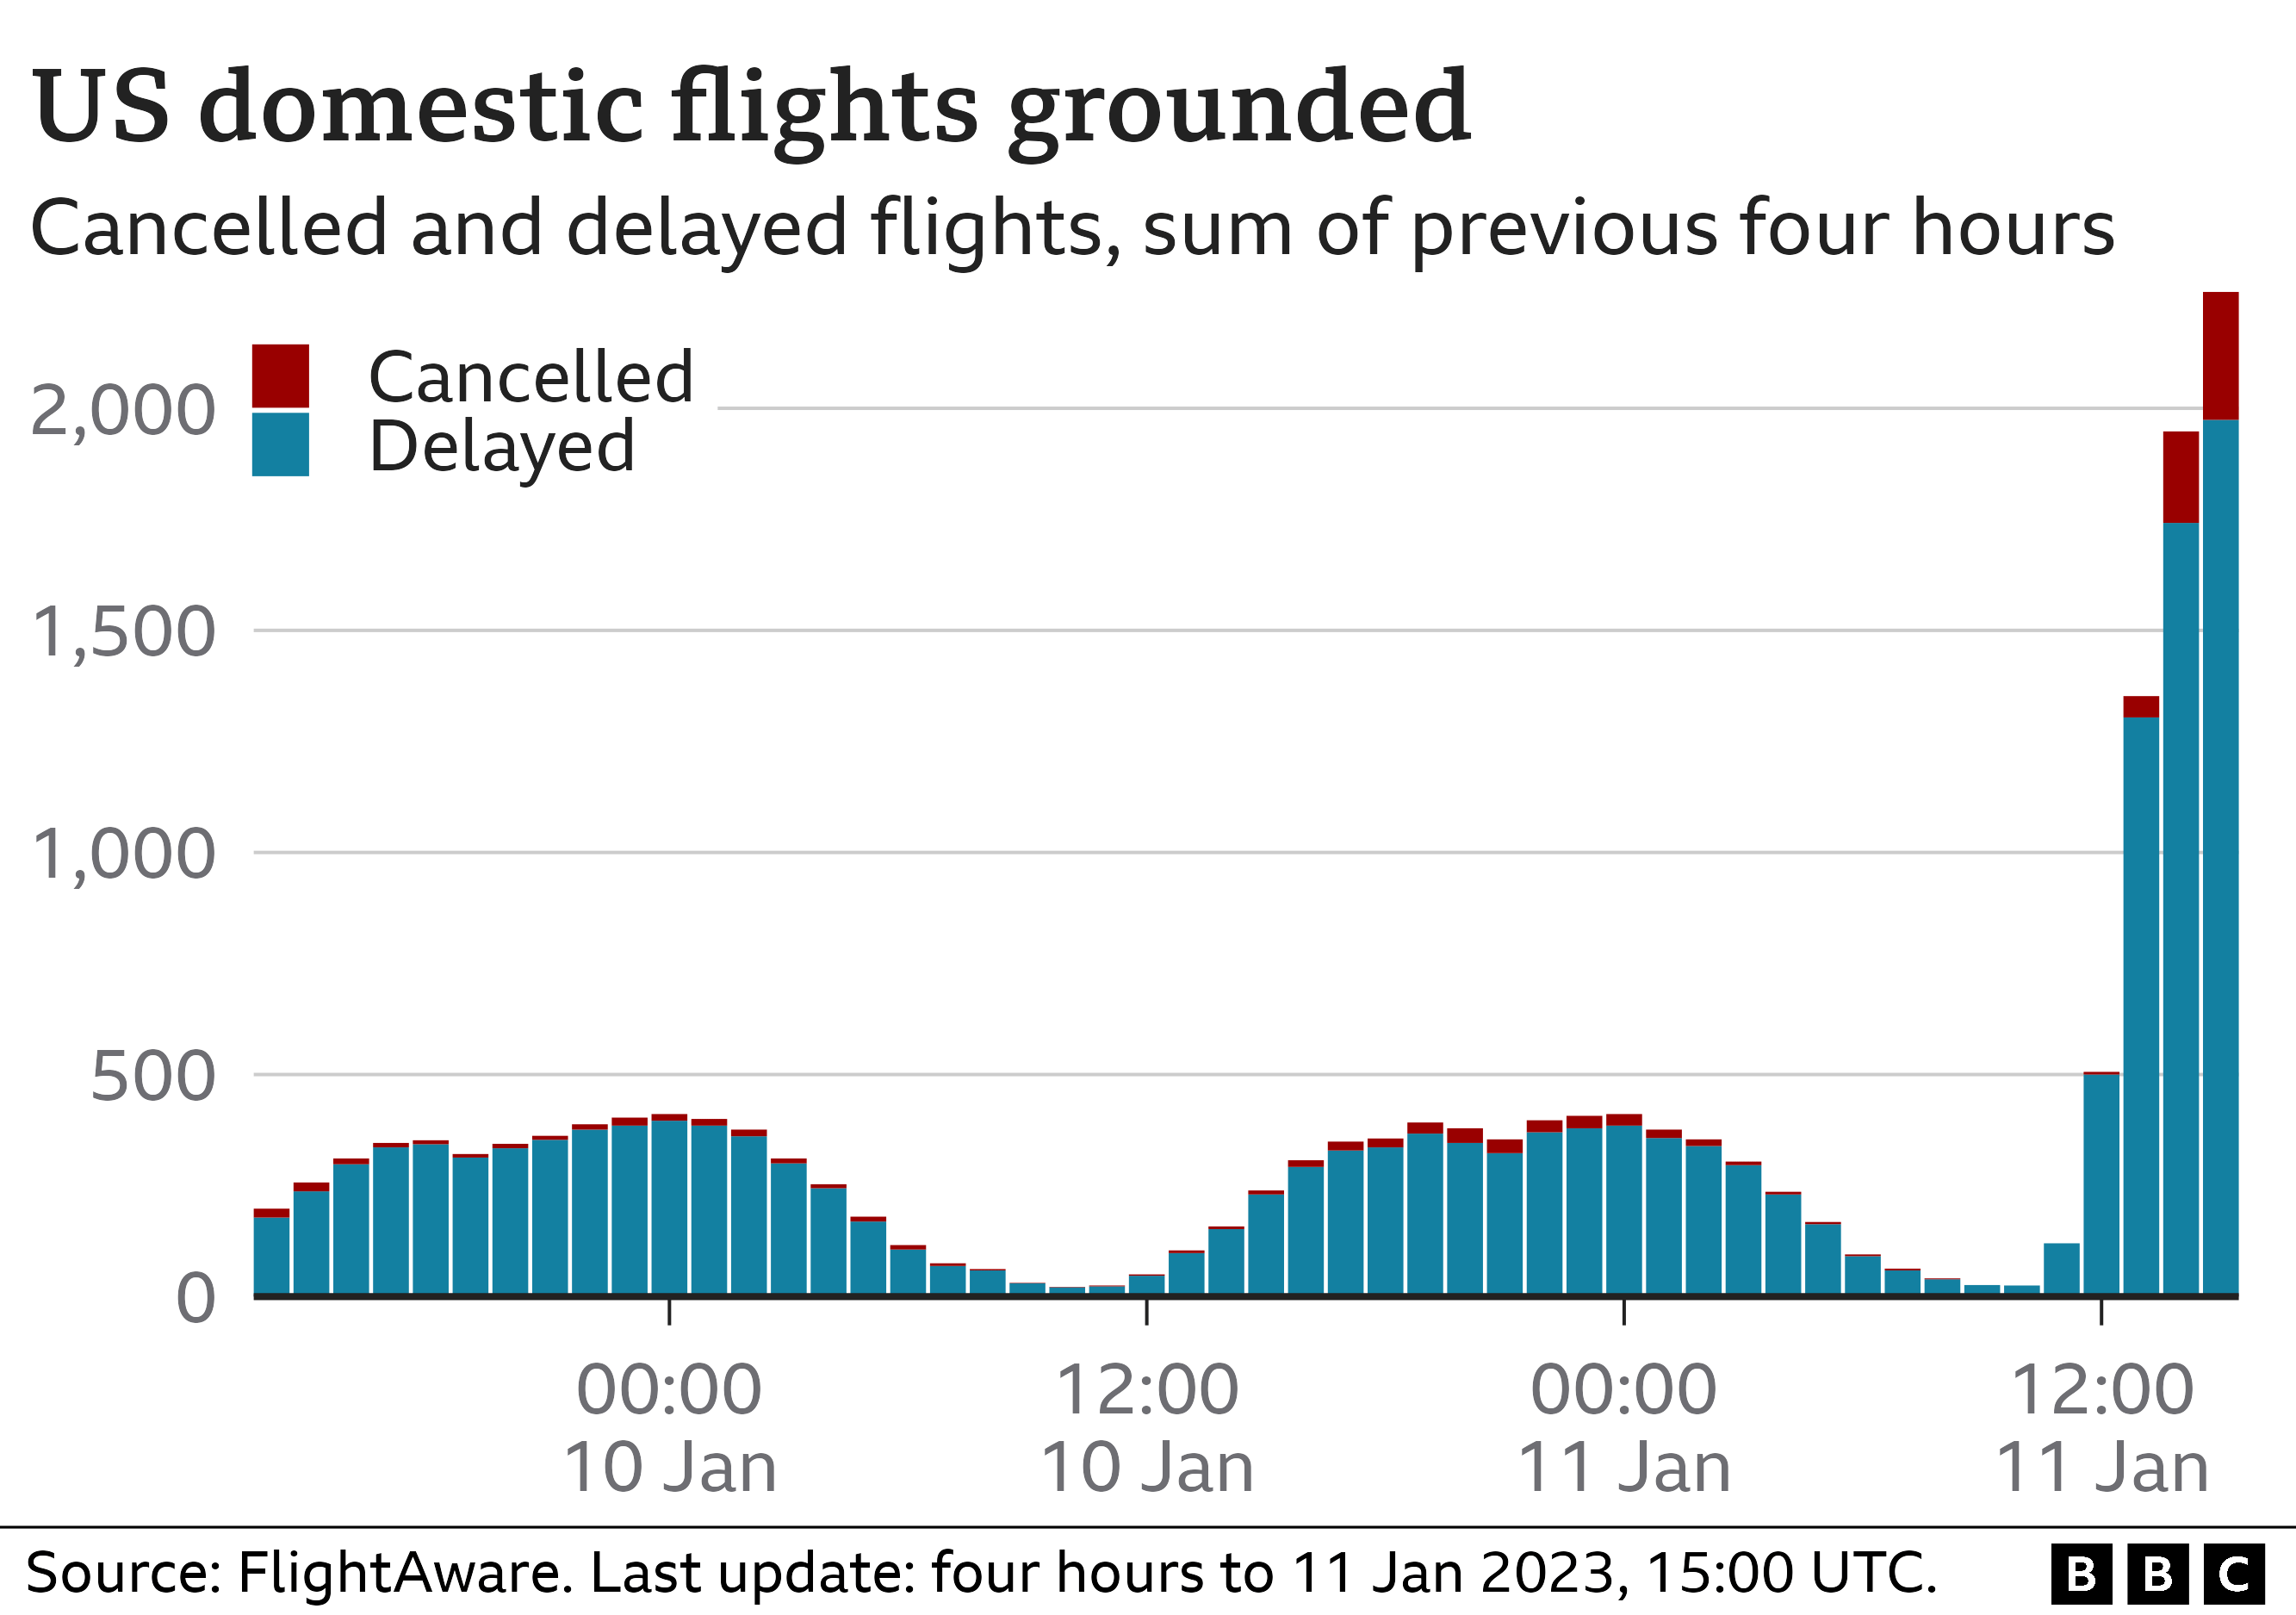 Chart showing grounded and delayed US flights